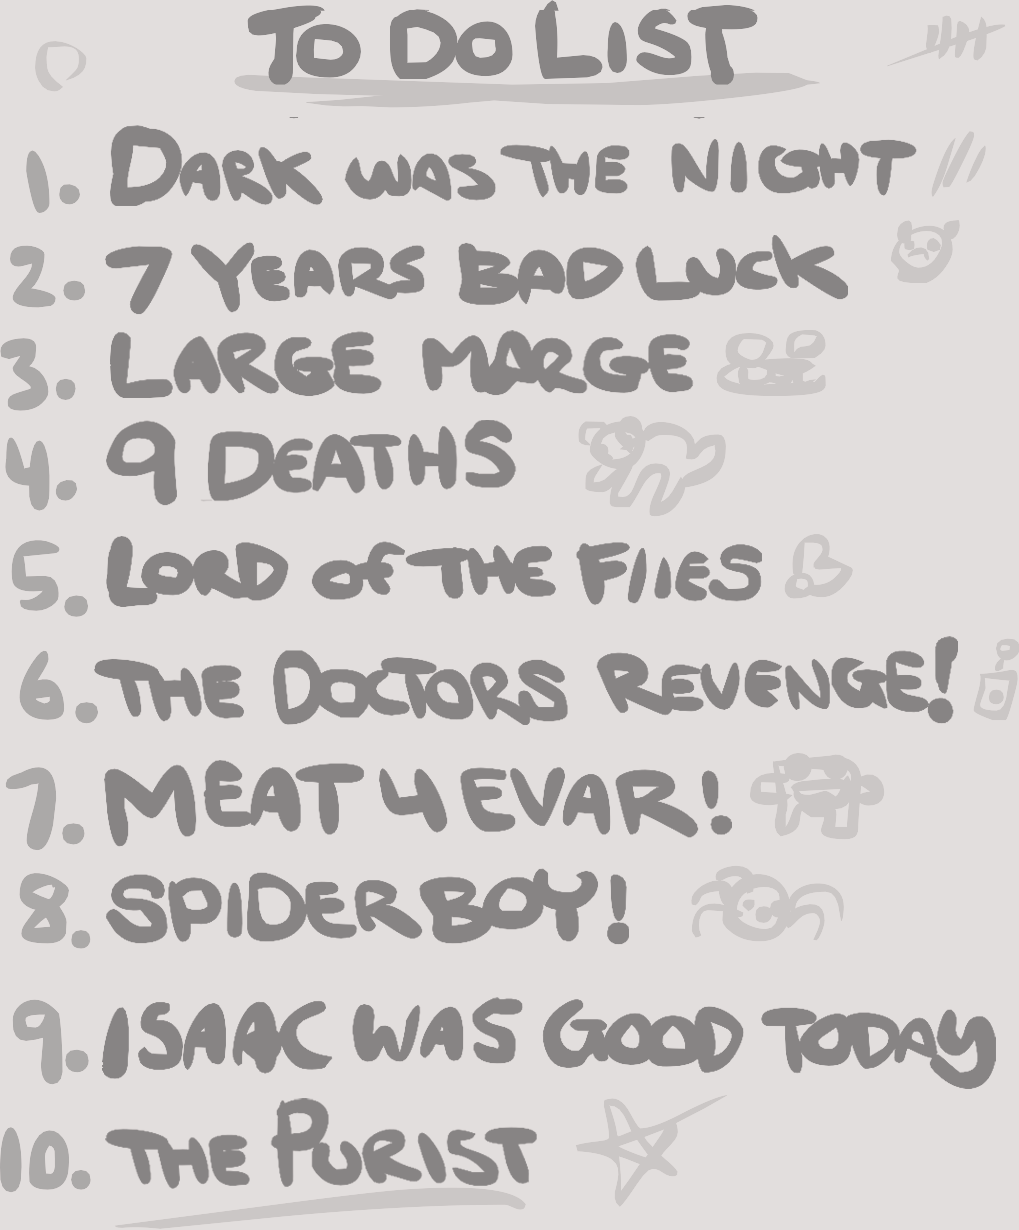 binding of isaac rebirth challenges